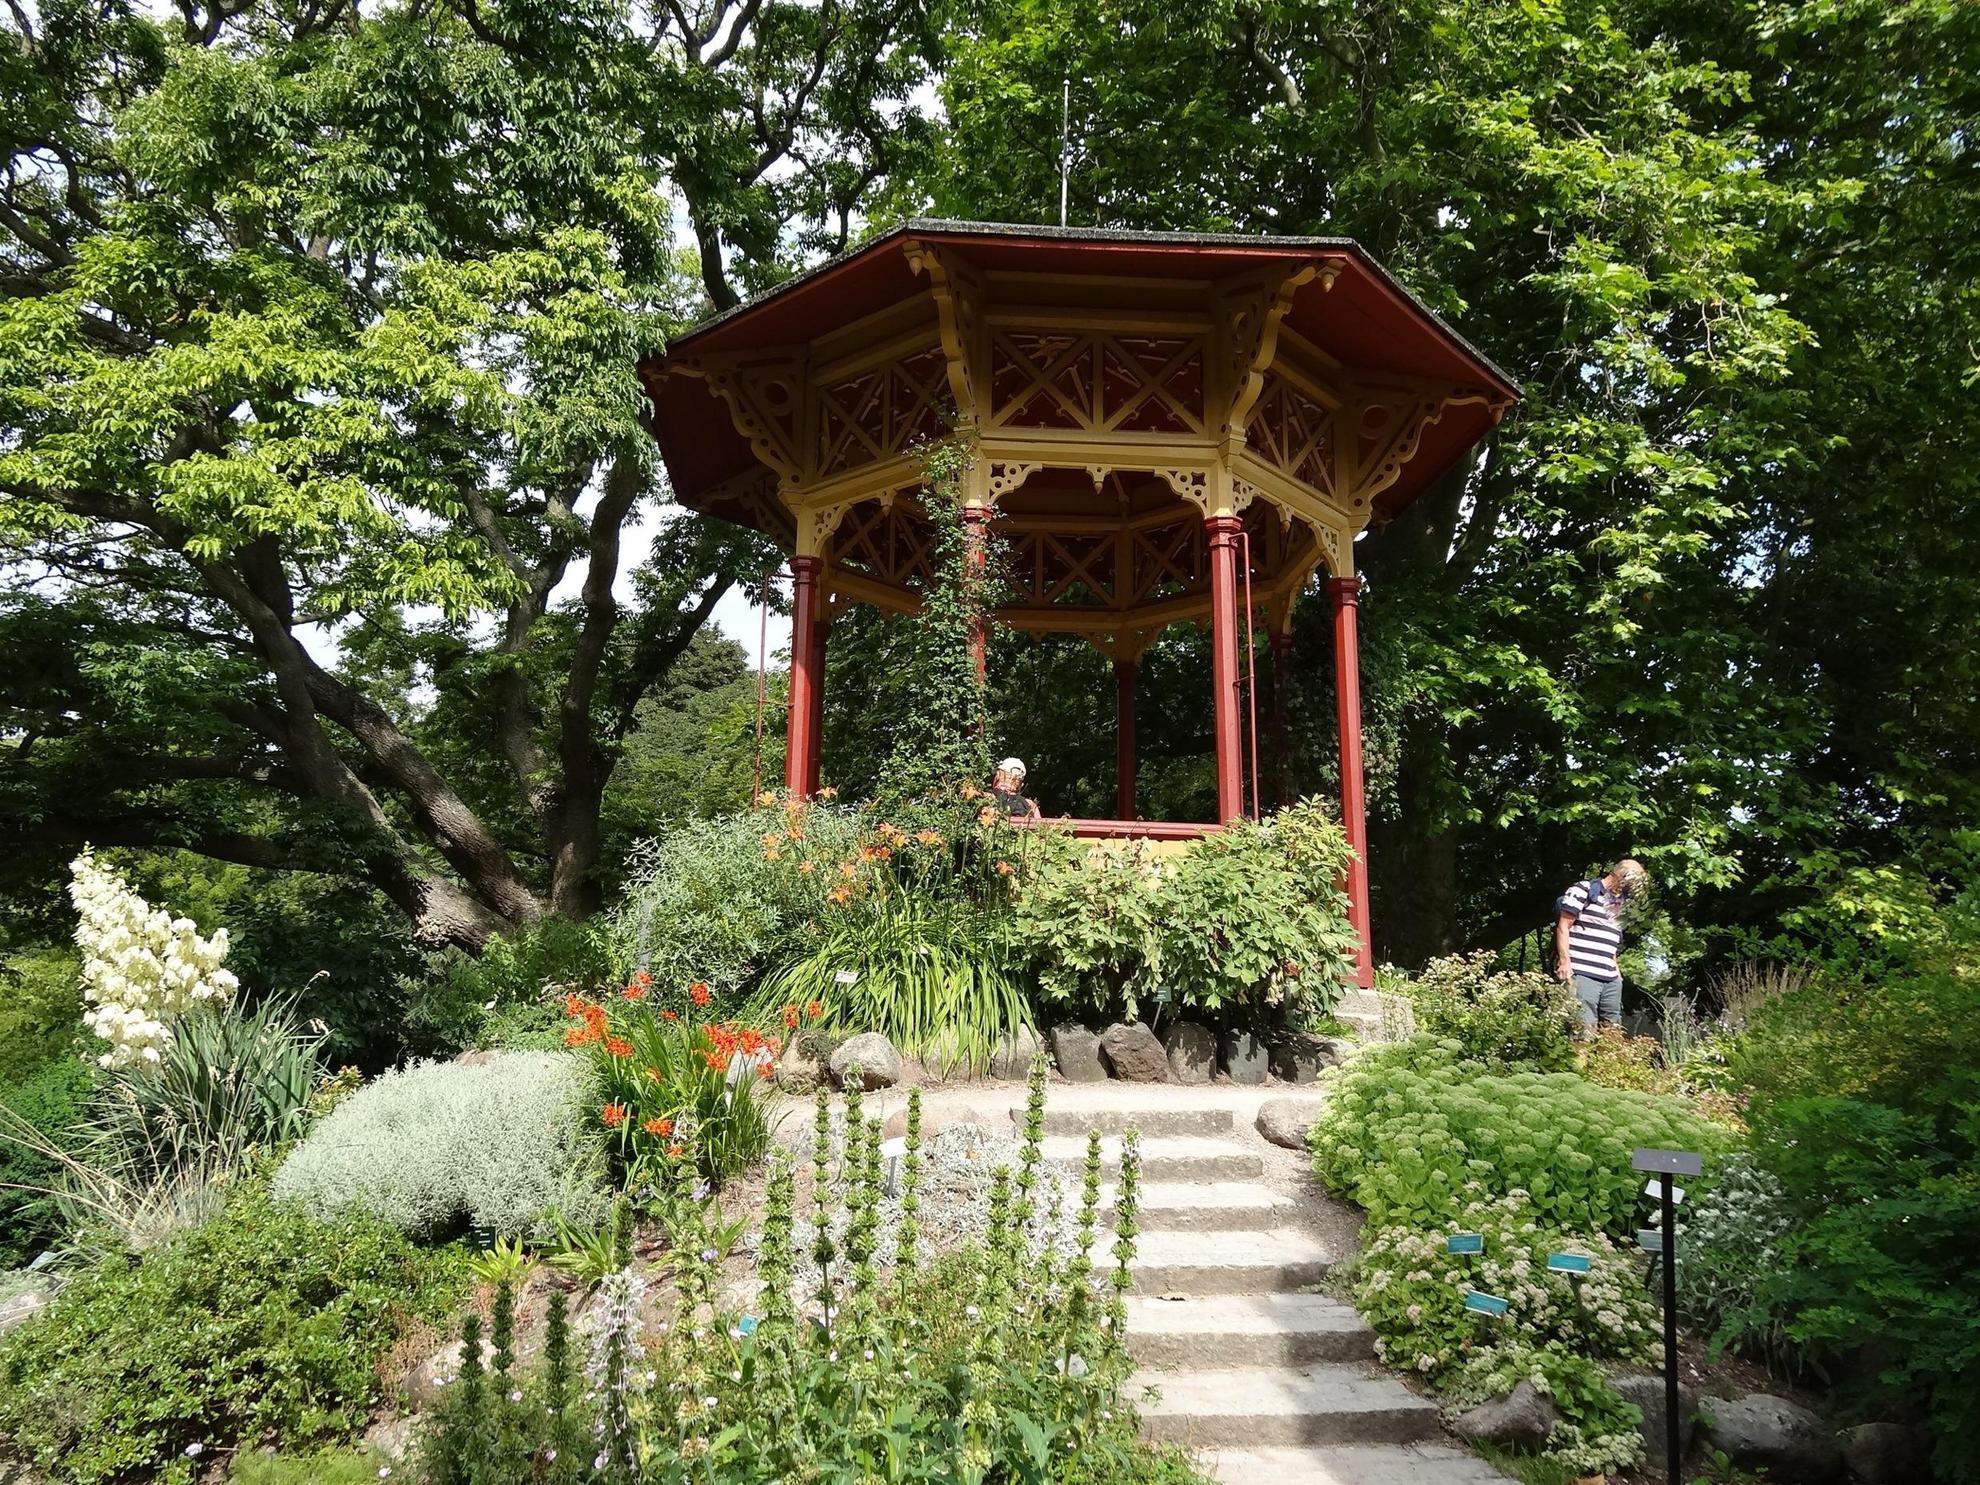 A red and yellow gazebo in a botanical garden during summer.